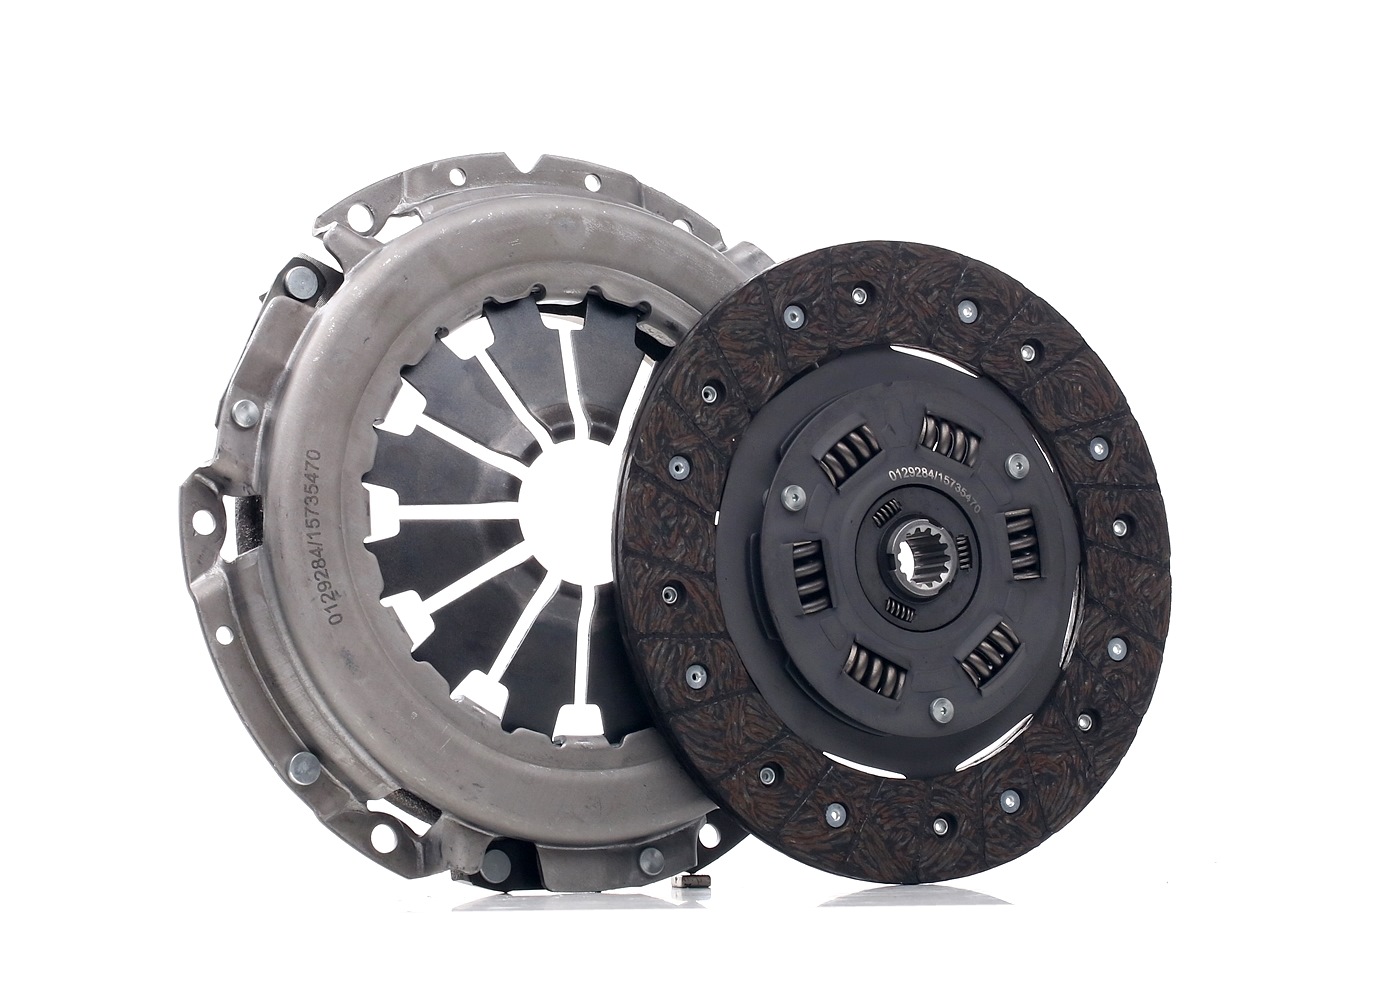 STARK SKCK-0100757 Clutch kit two-piece, with synthetic grease, without clutch release bearing, 200mm